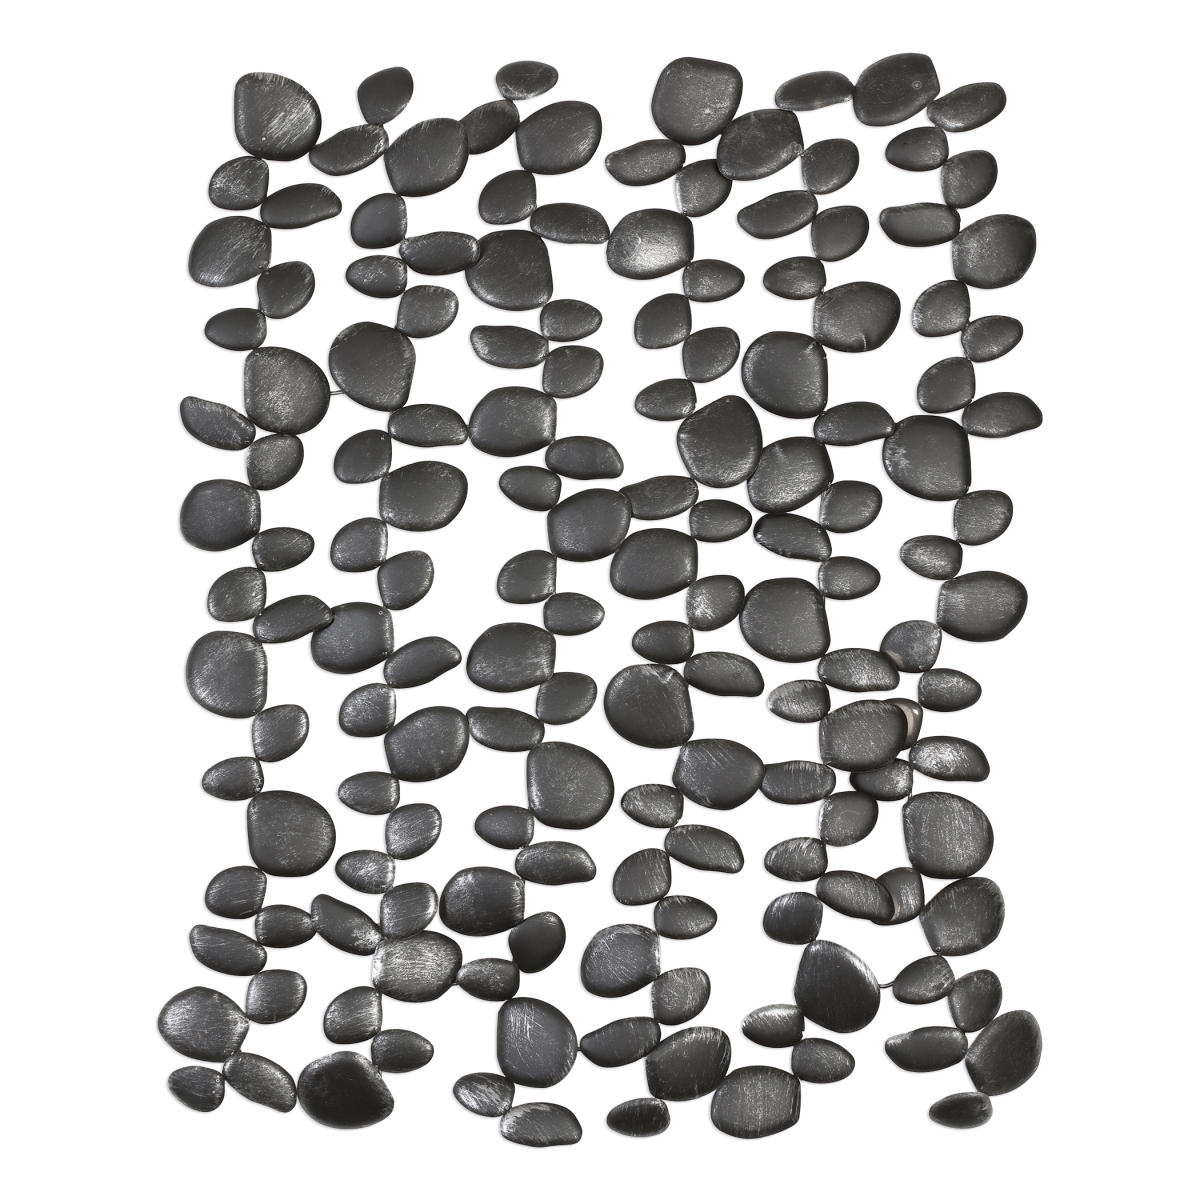 04144 Skipping Stones Forged Iron Wall Art